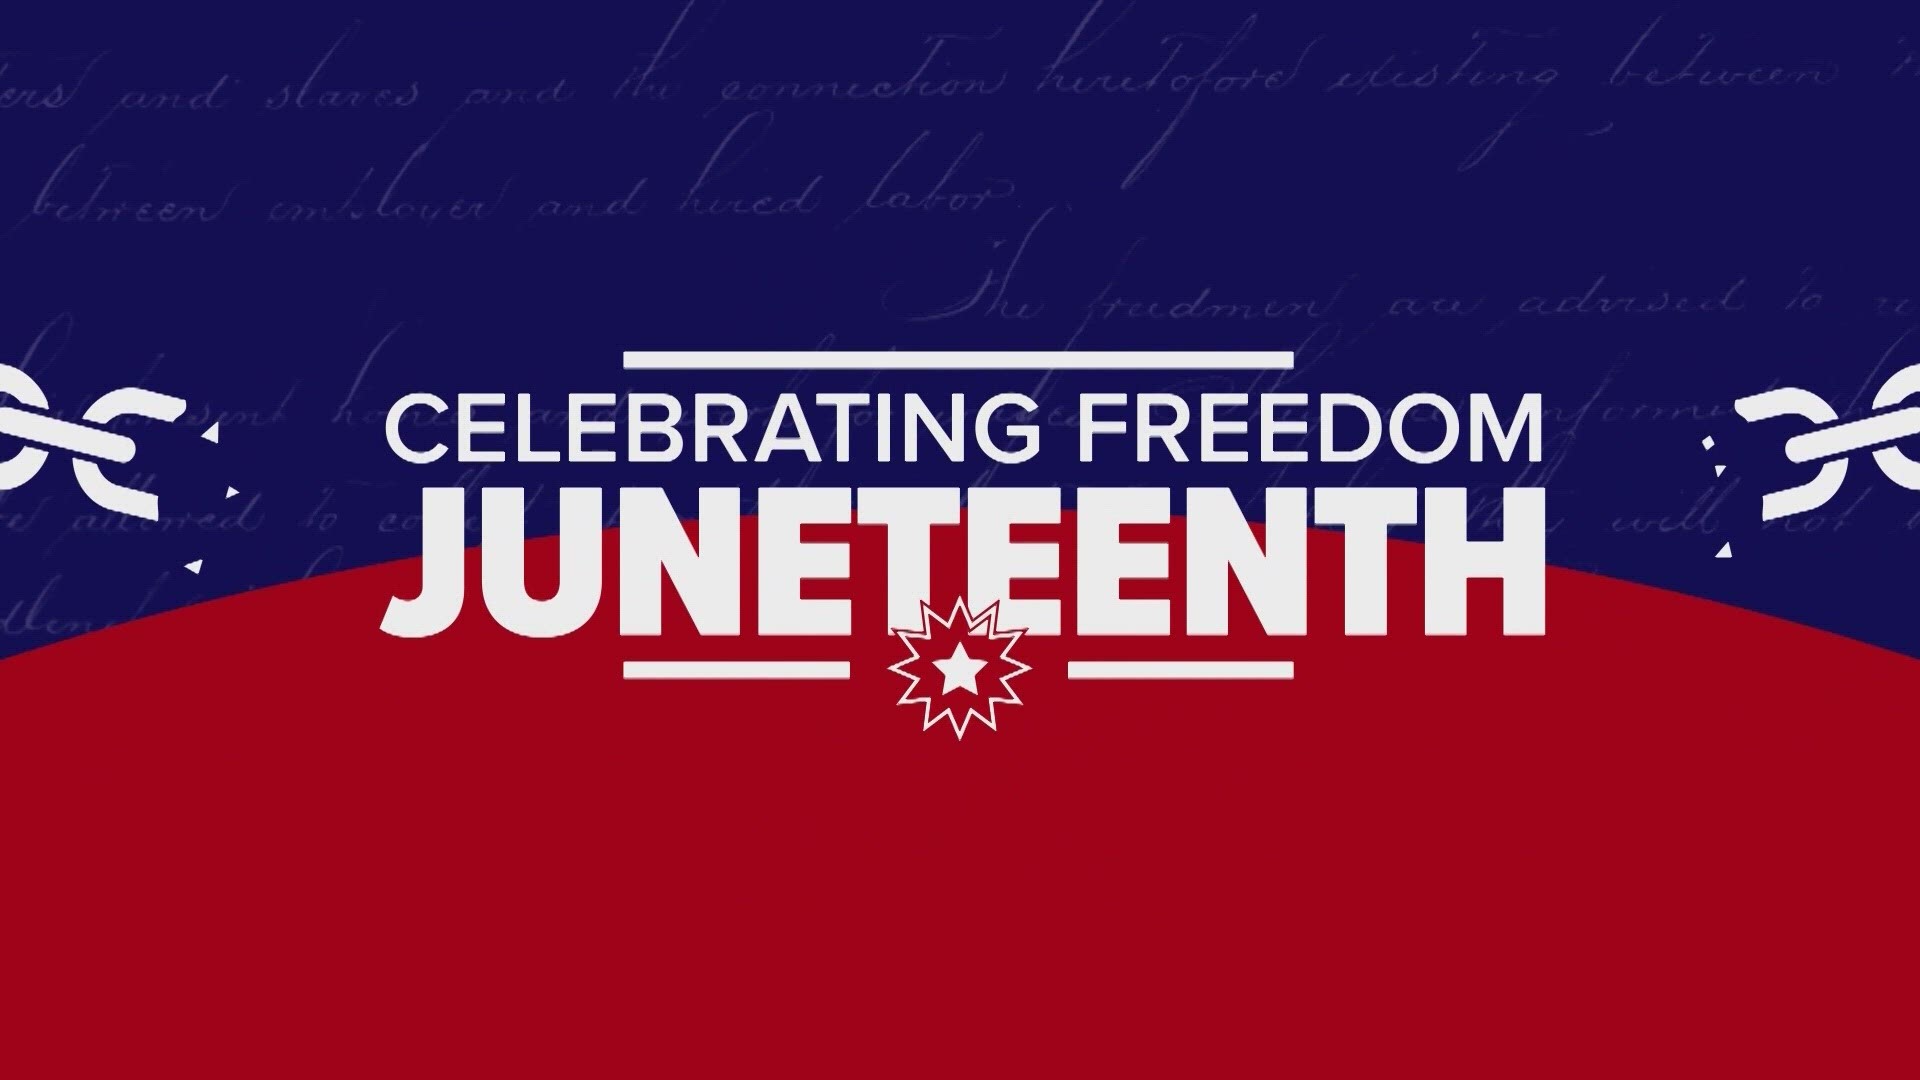 Juneteenth flag designer throws first pitch at Red Sox game